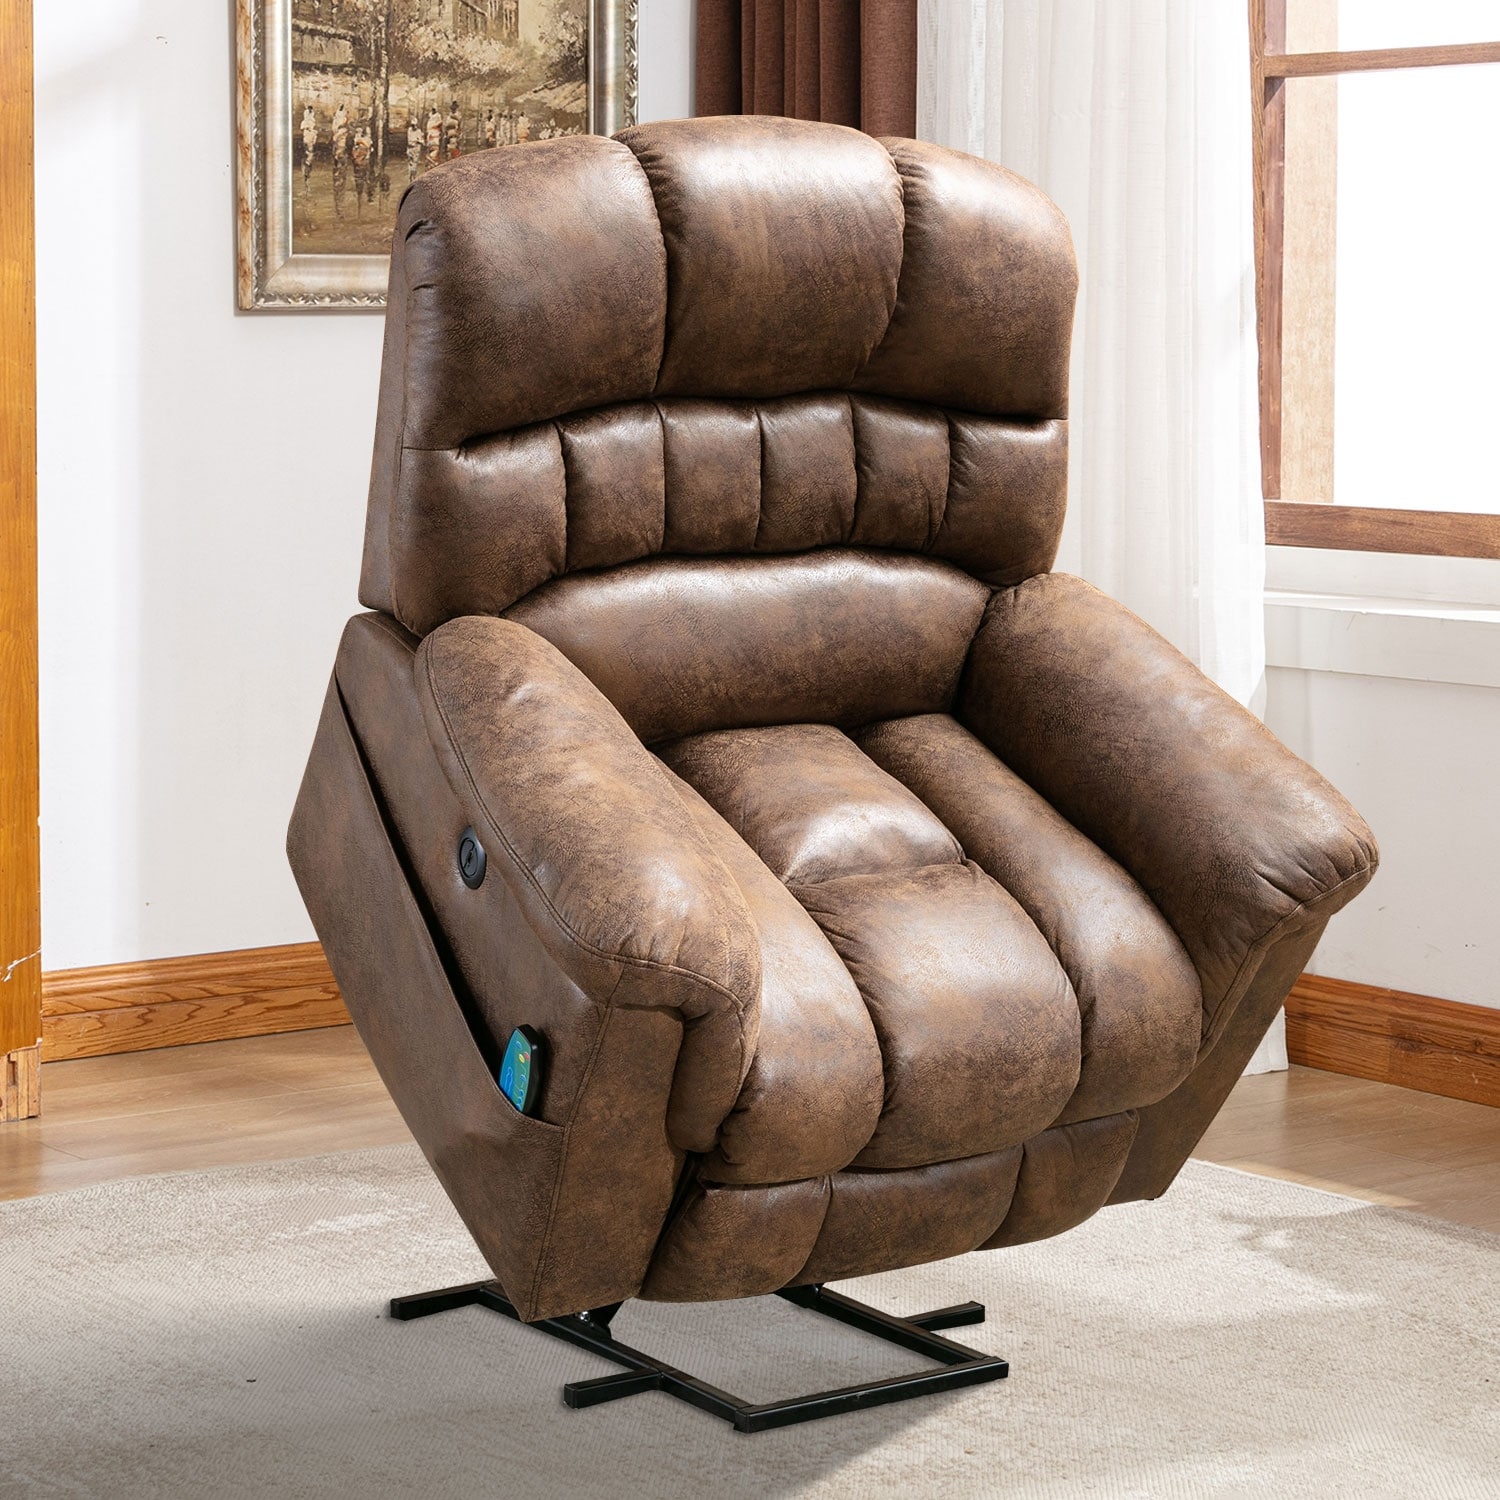 https://ak1.ostkcdn.com/images/products/is/images/direct/87b0c0b7dcd790576be8f8348a1dc16d85b5604b/Super-Soft-Microsuede-Power-Lift-Recliner-Sofa-with-Massage-Chair.jpg